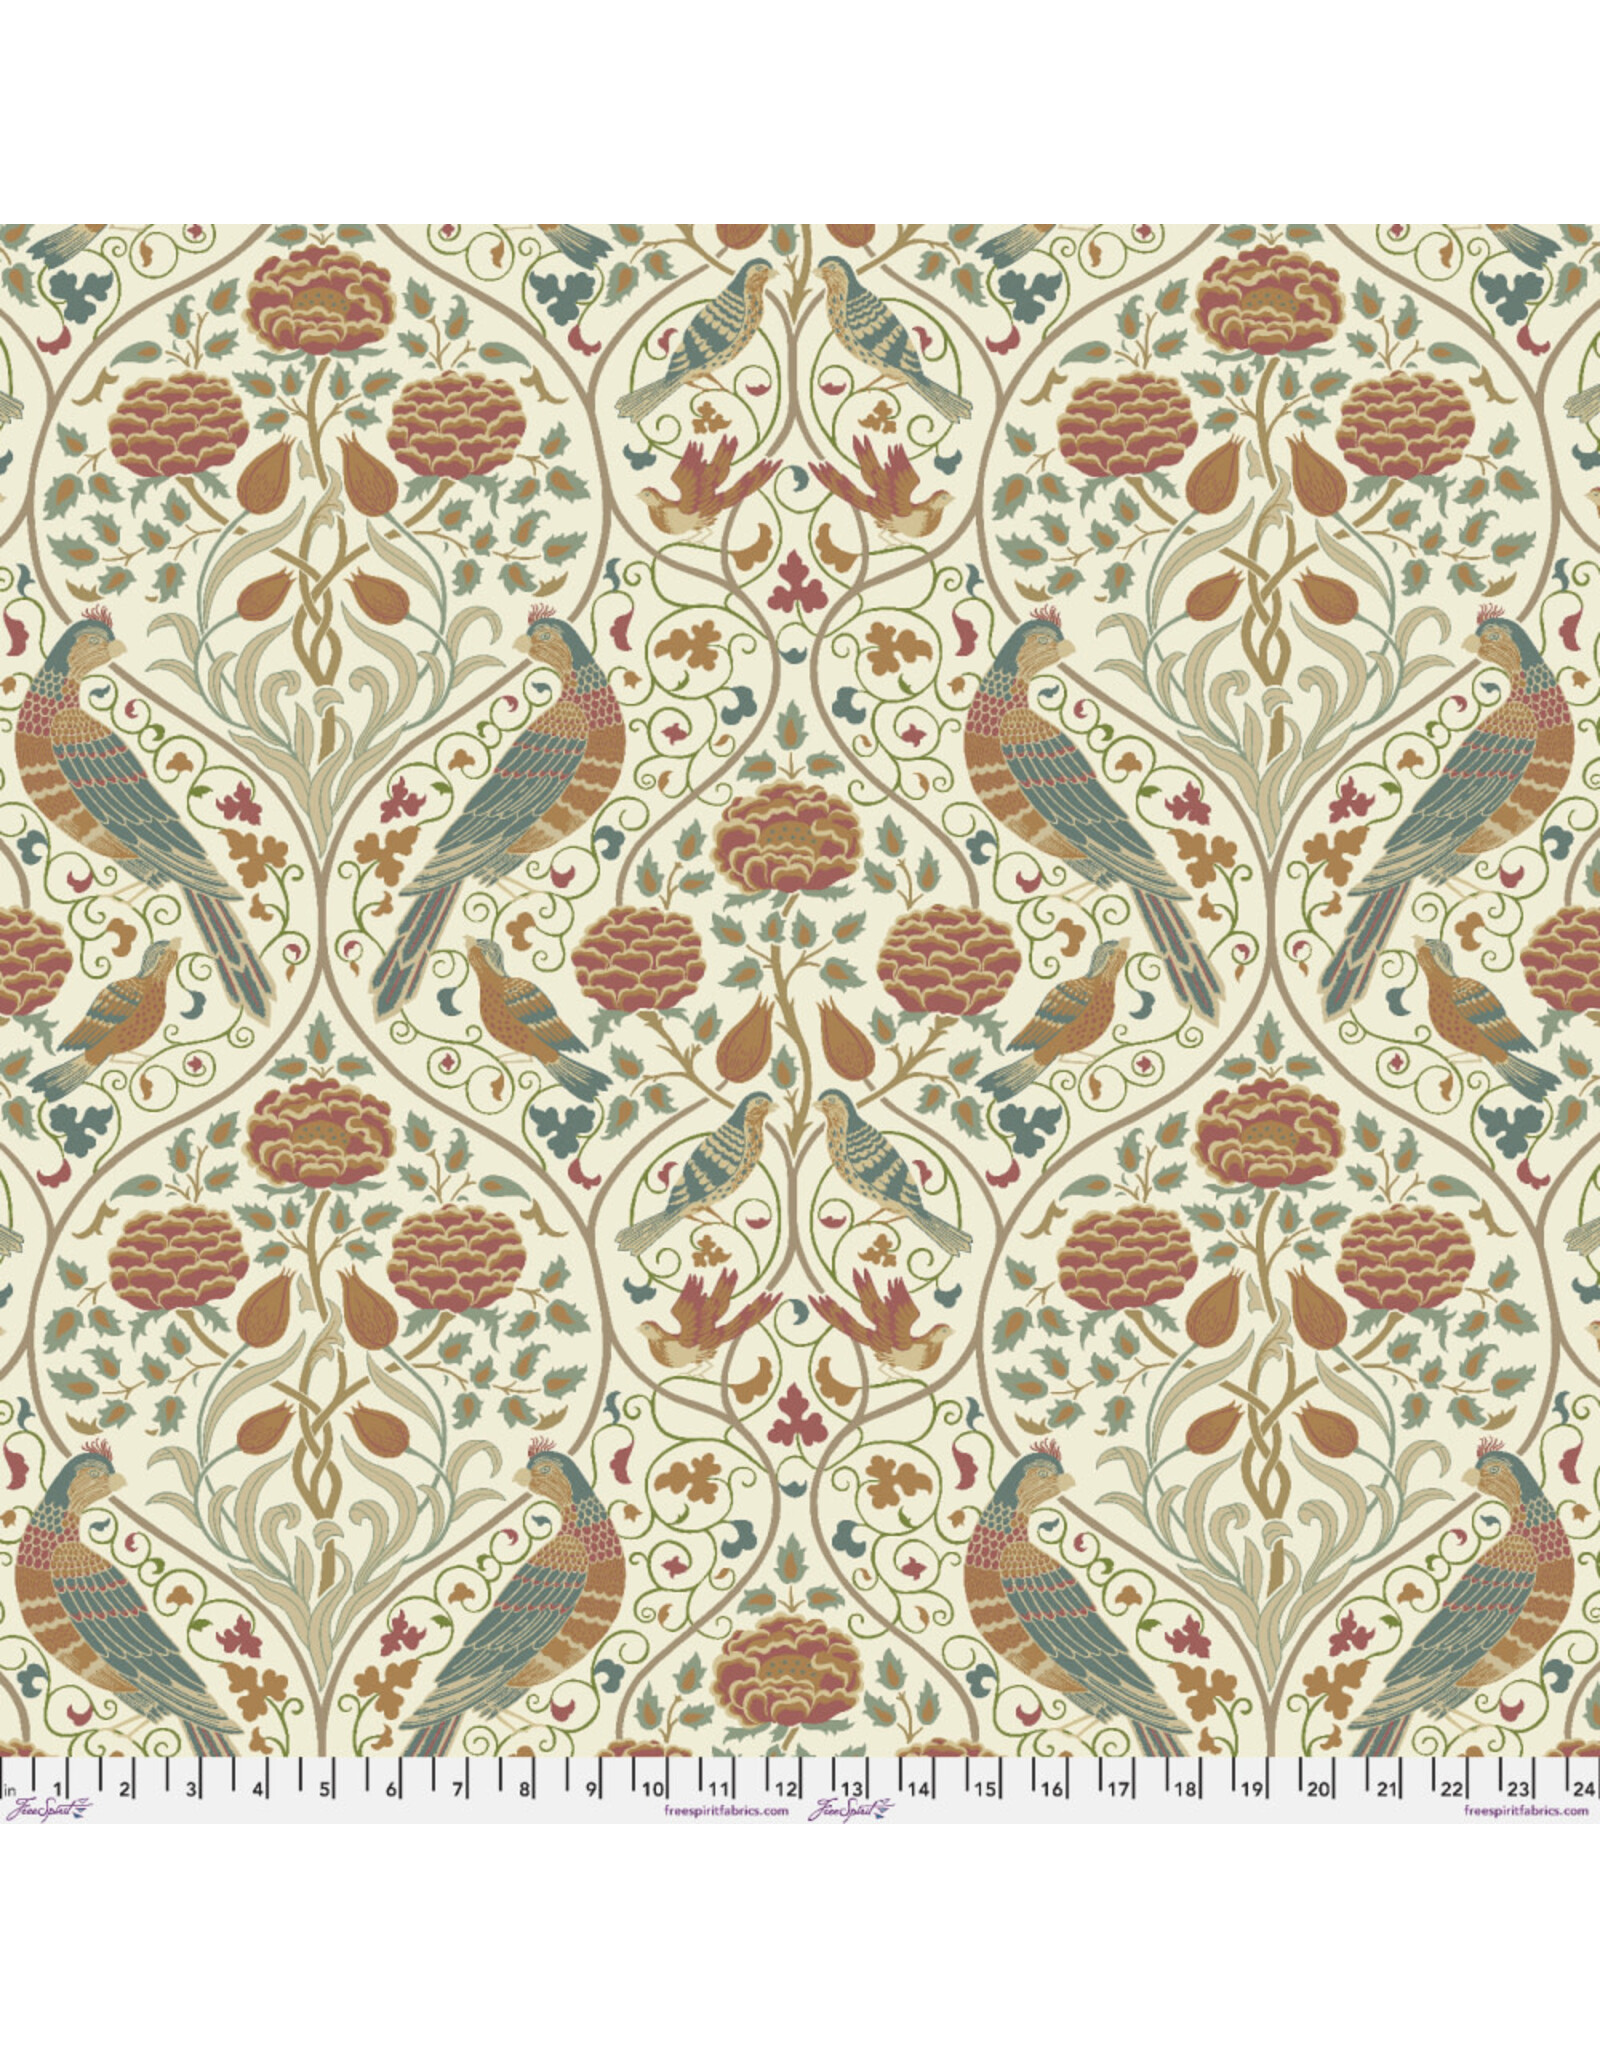 PD's William Morris Collection Morris & Co, Classics, Seasons by May Large in Linen, Dinner Napkin